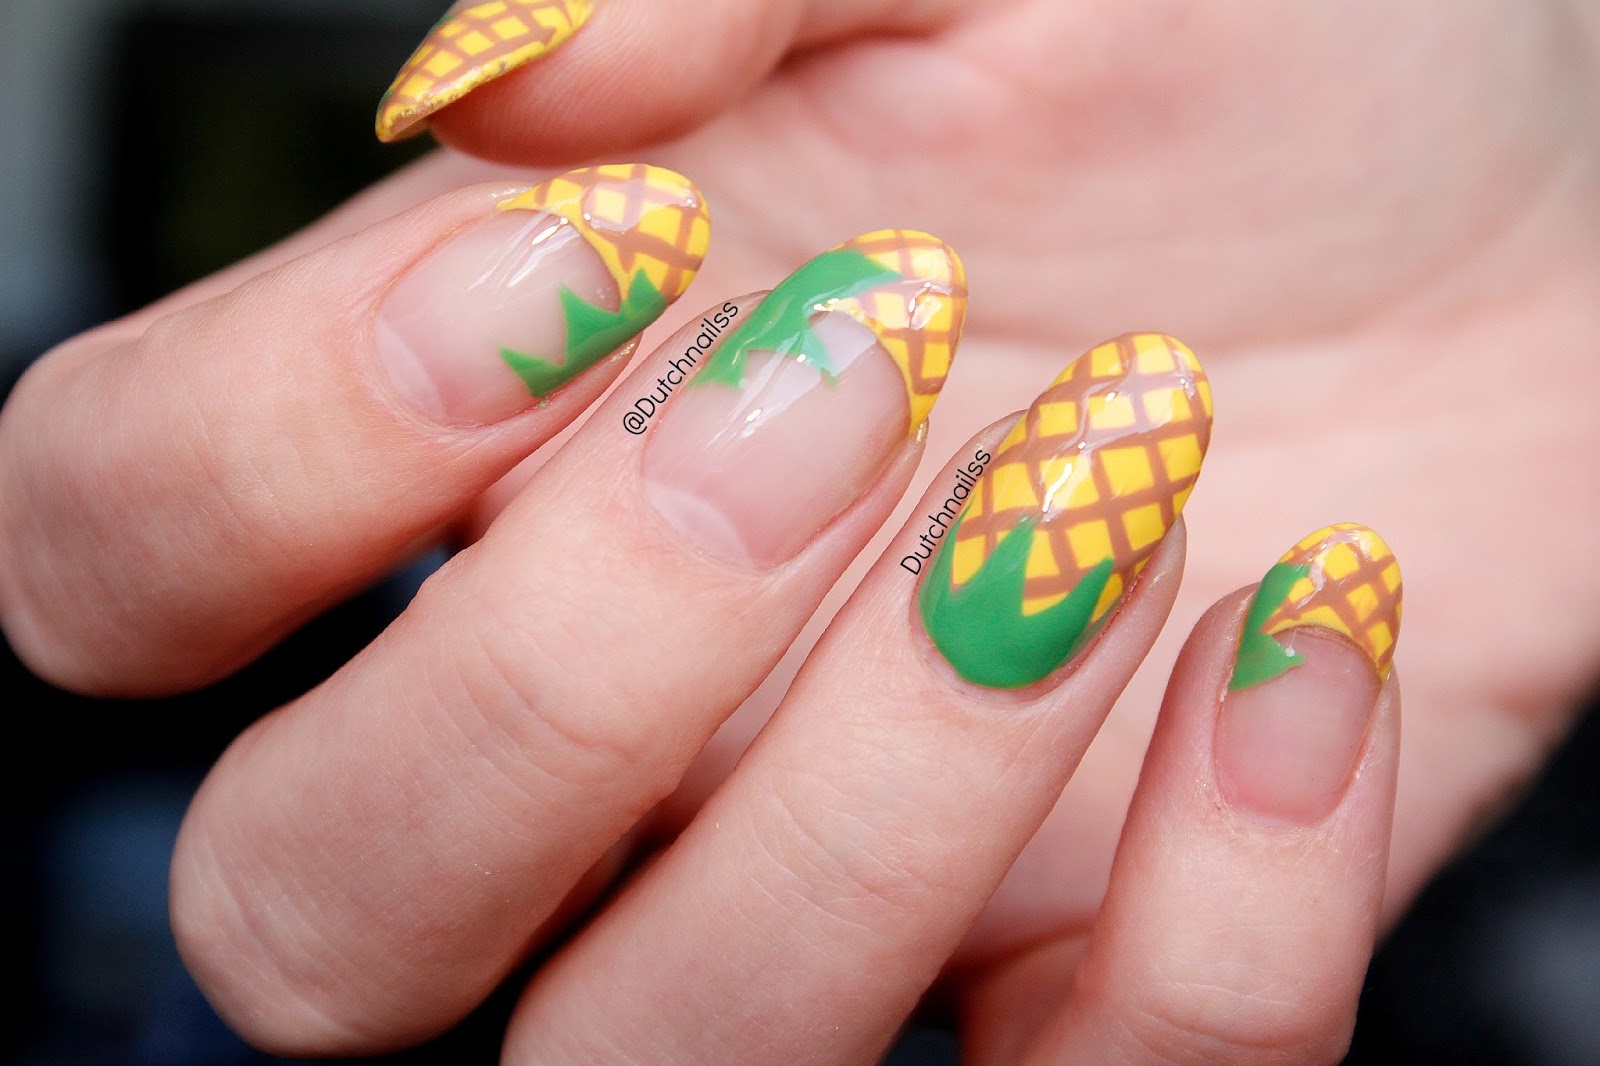 3. Pineapple Print Nail Decals - wide 5